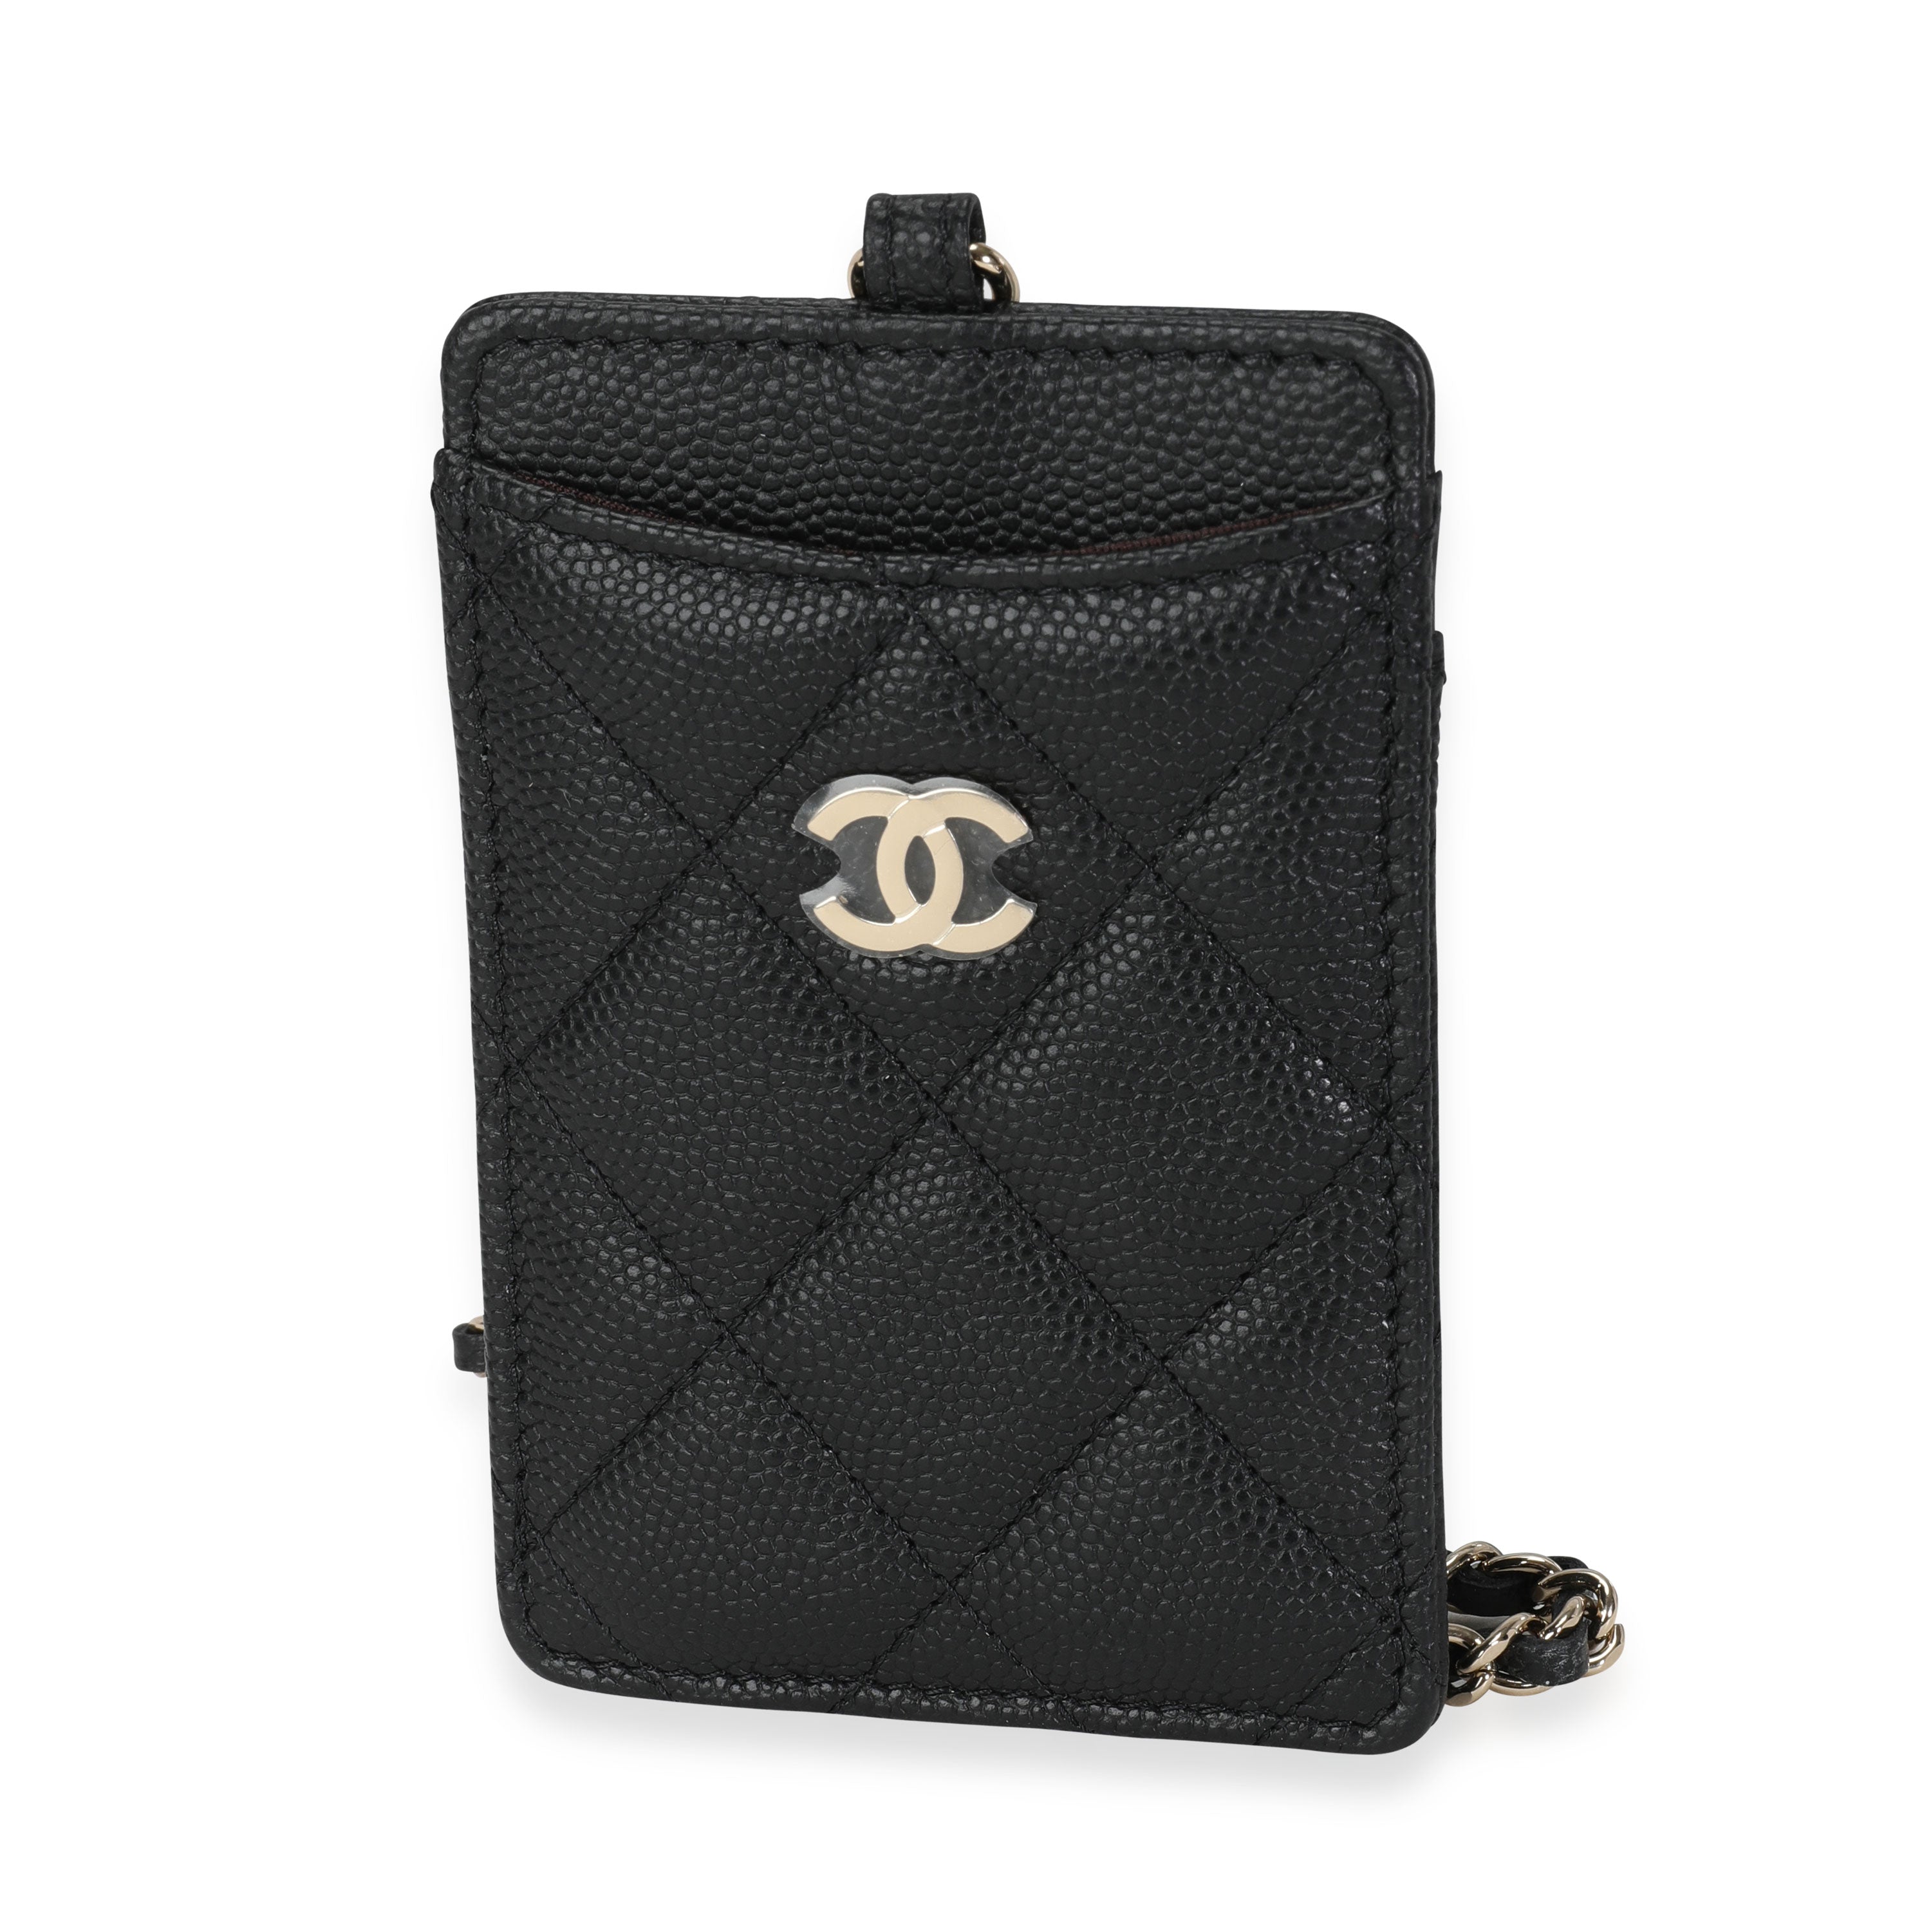 Chanel Caviar Quilted Key Holder Case Black